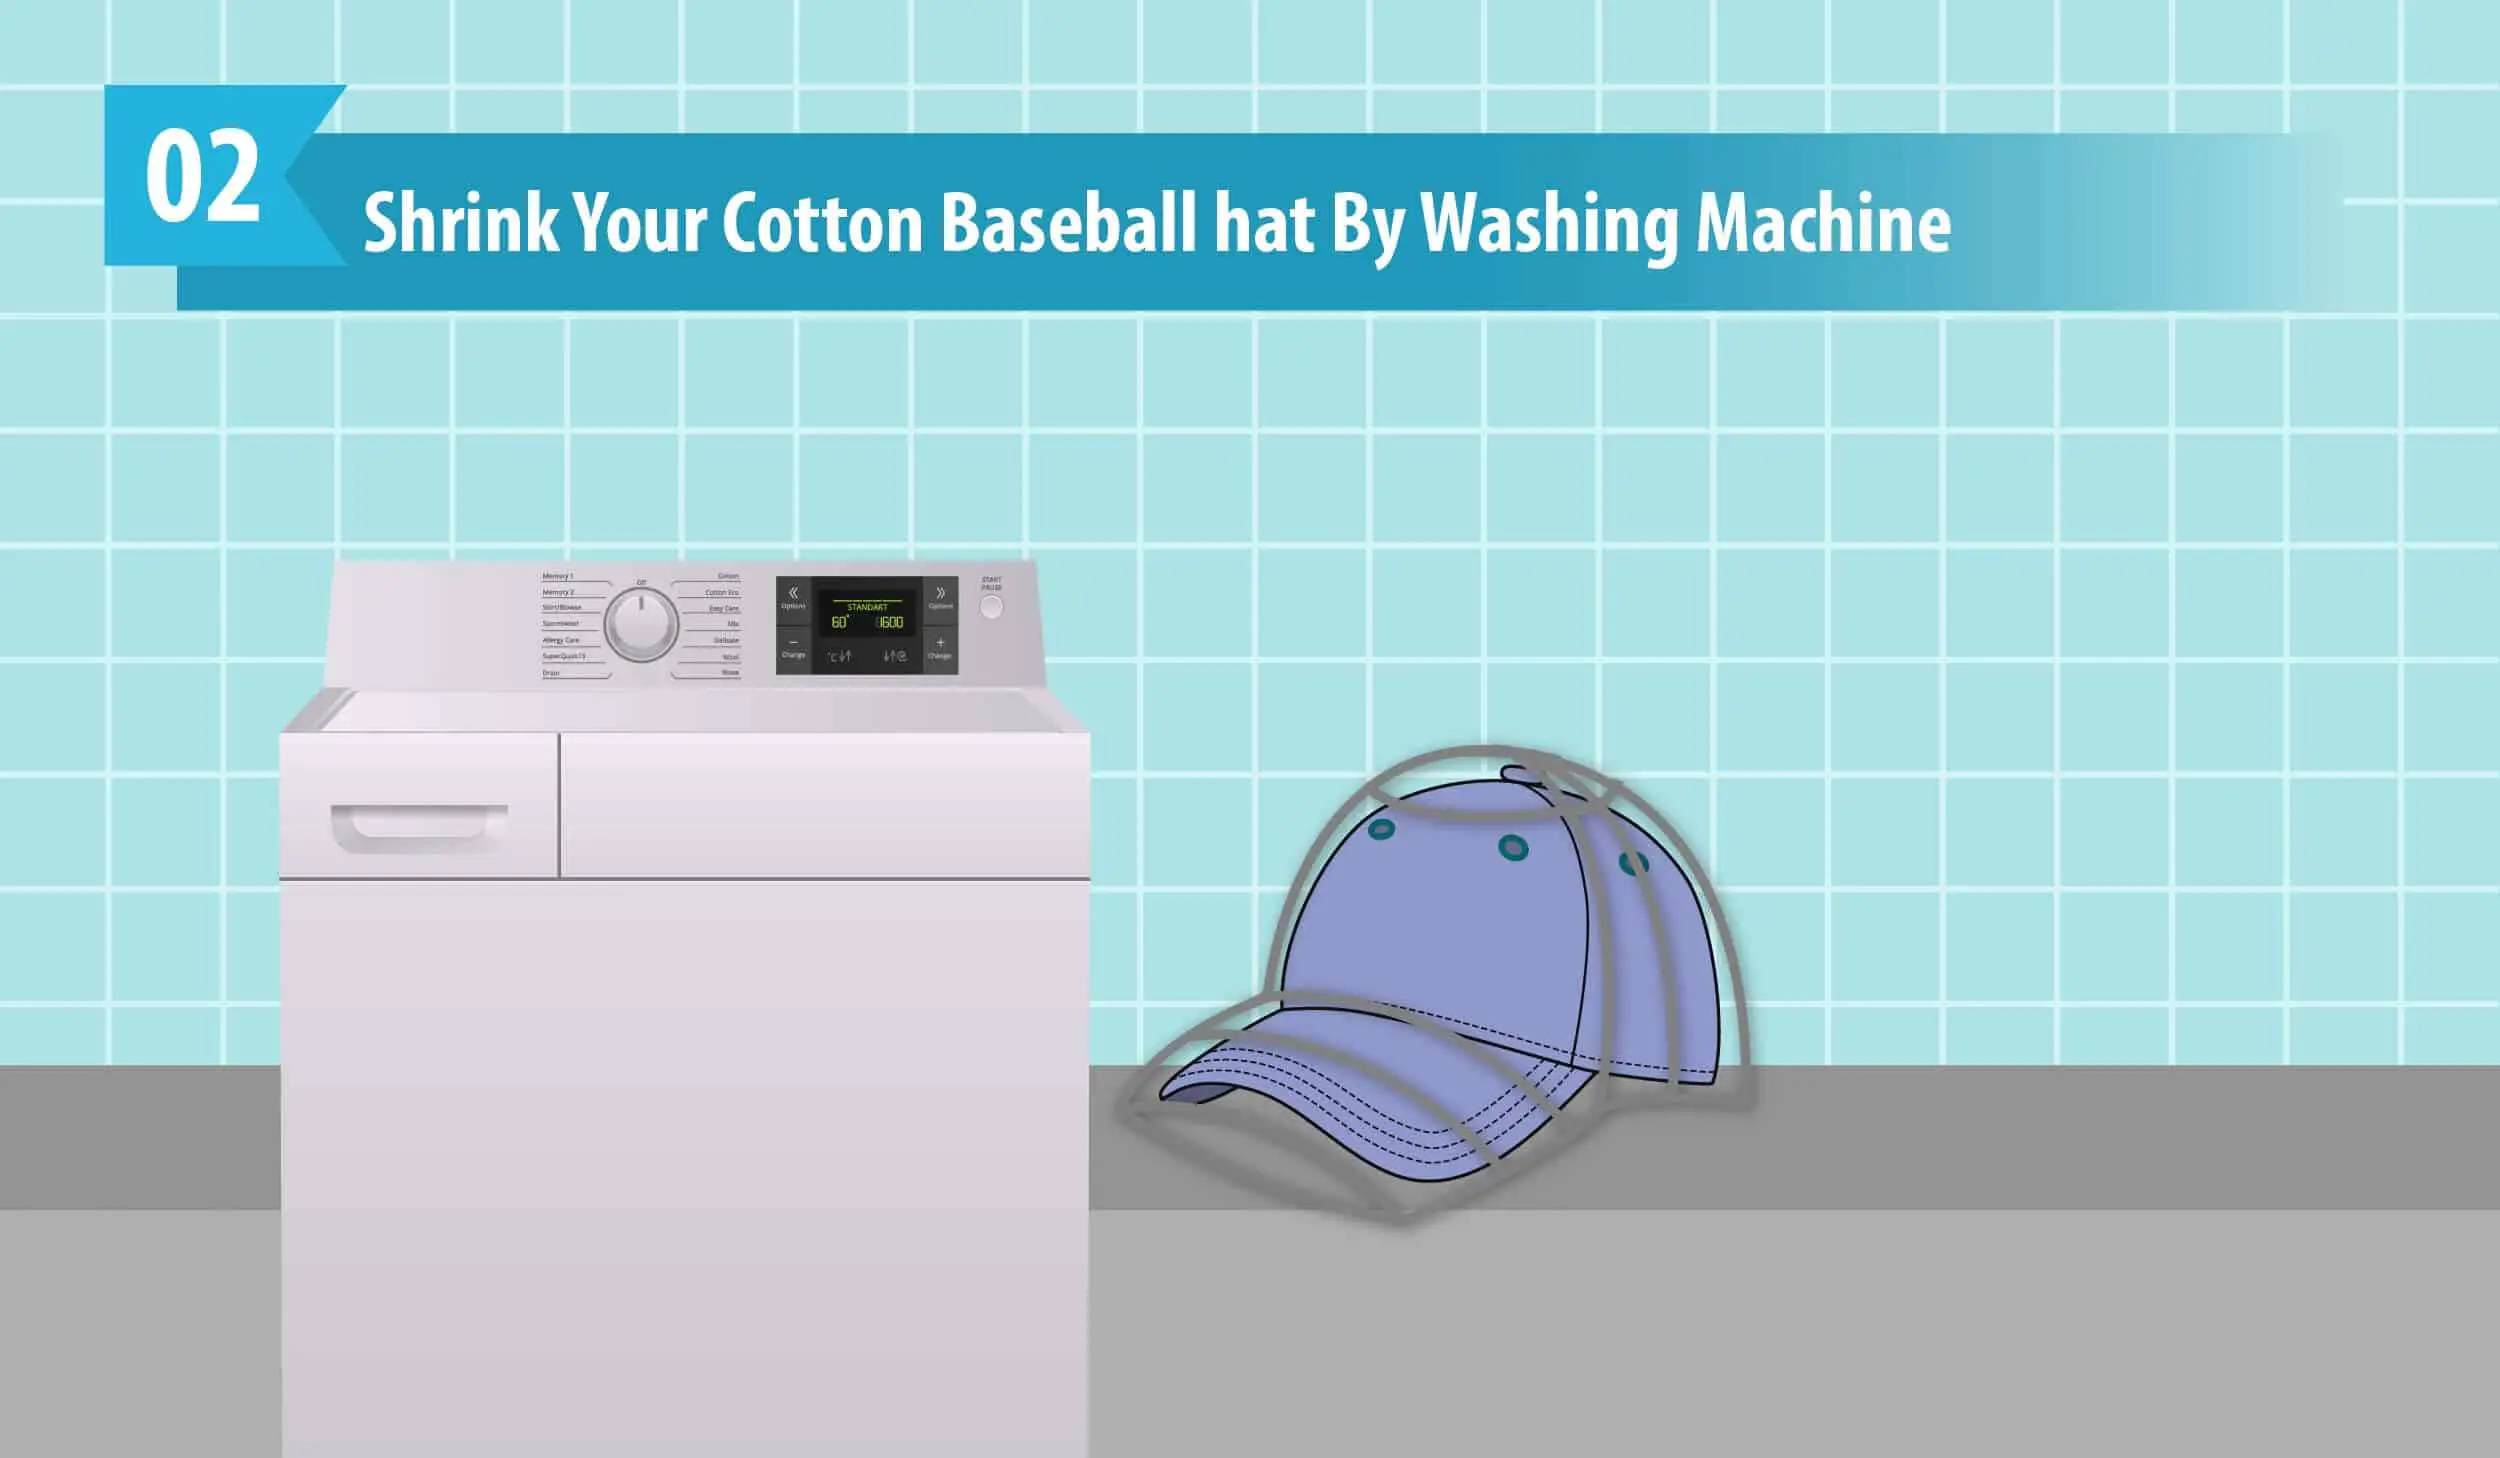 Shrink Your Cotton Baseball hat By Washing Machine